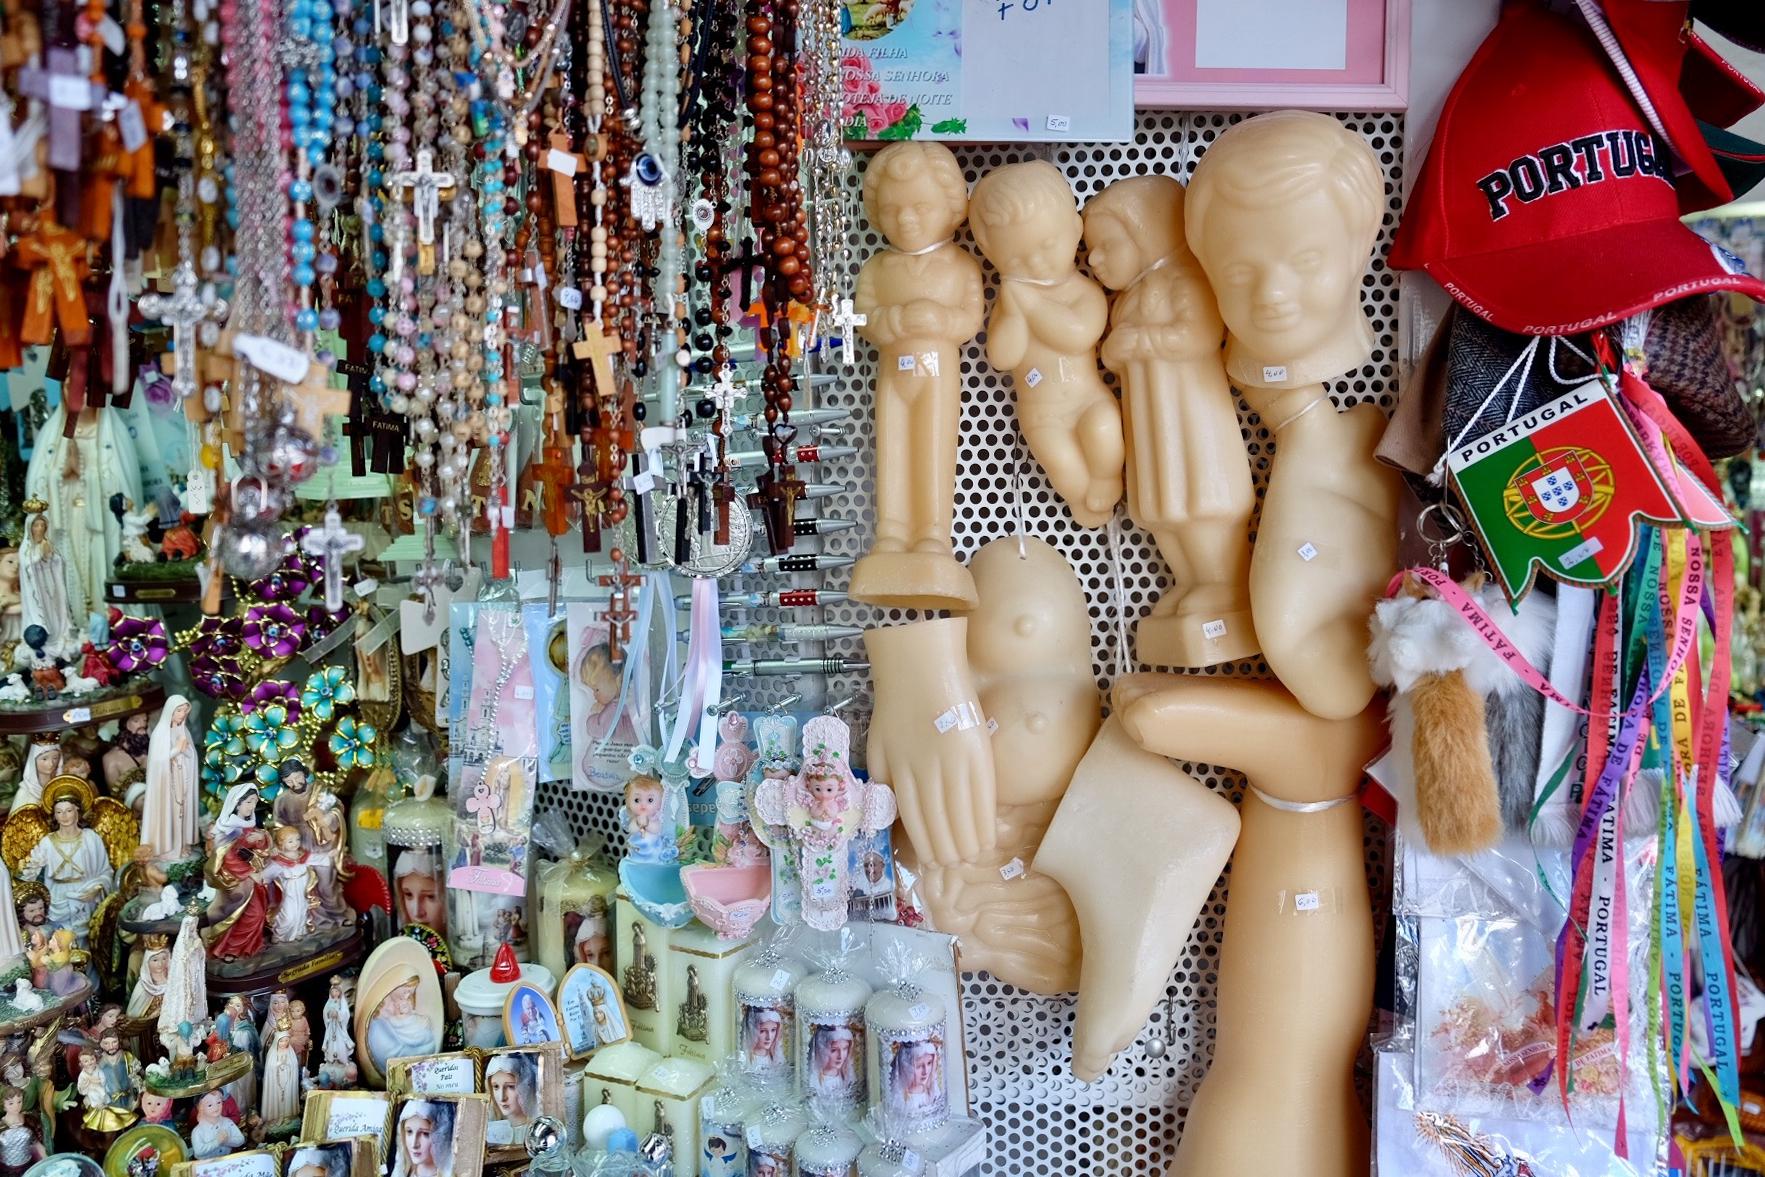 Souvenirs and wax figurines for sale in Fatima, Portugal